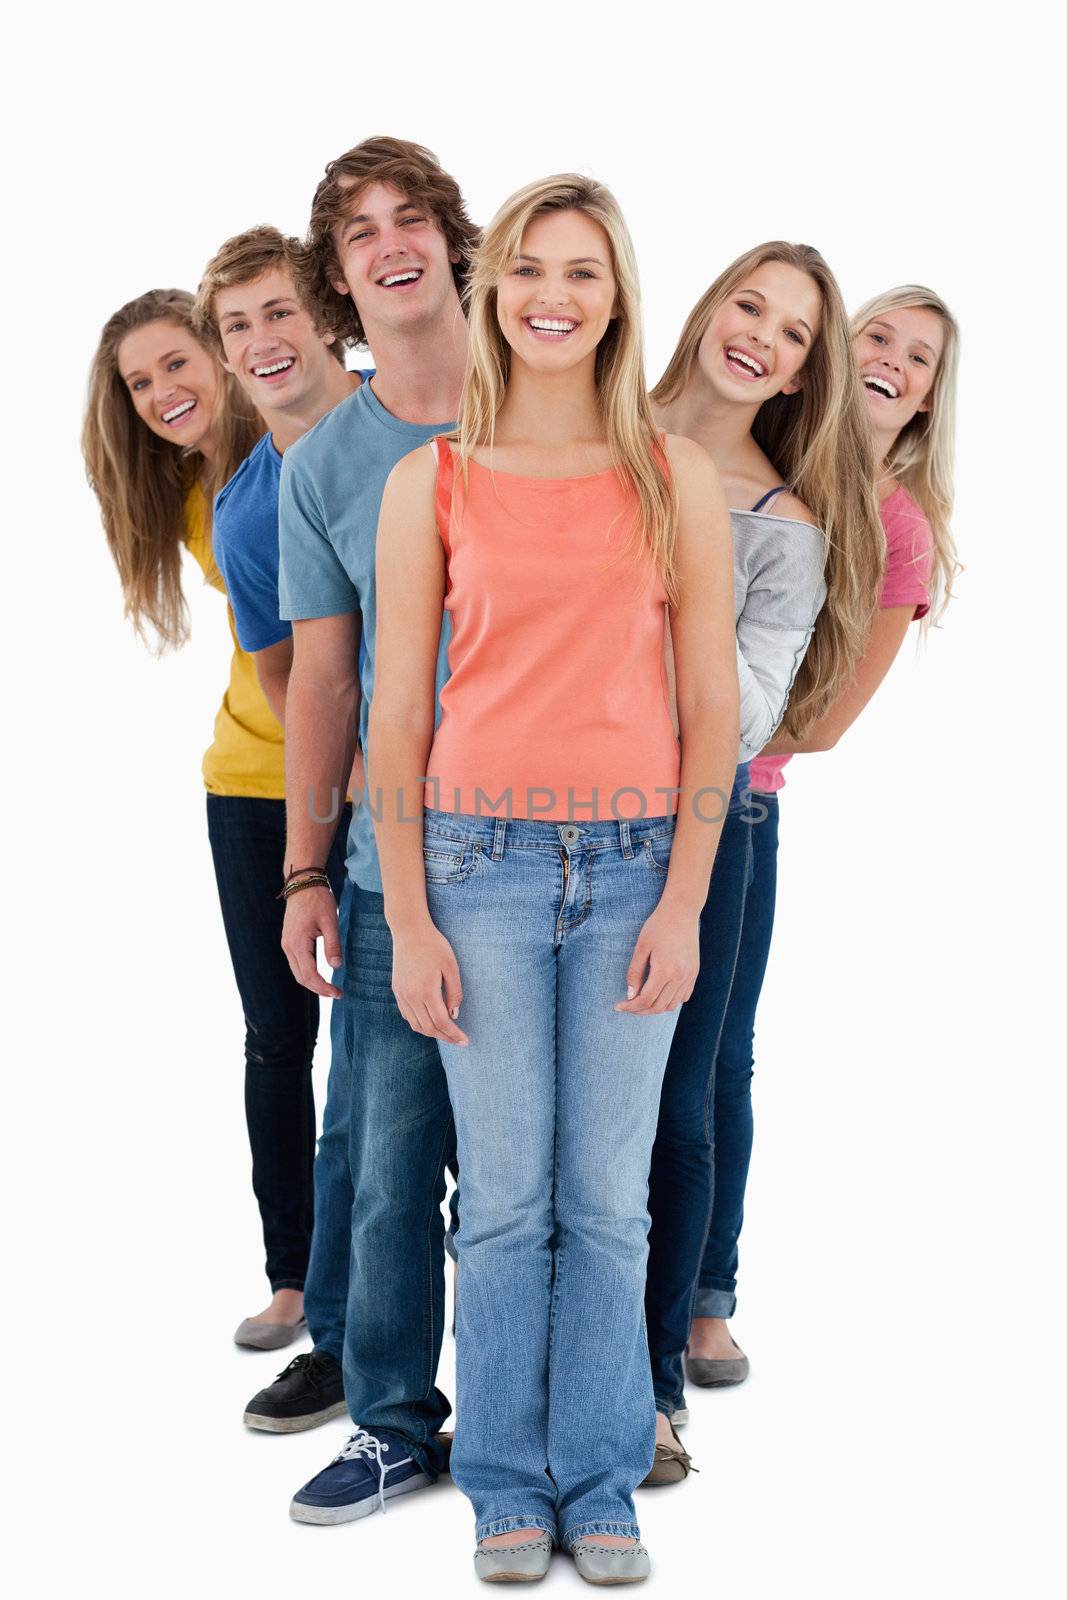 A smiling group of people standing and looking at the camera  by Wavebreakmedia